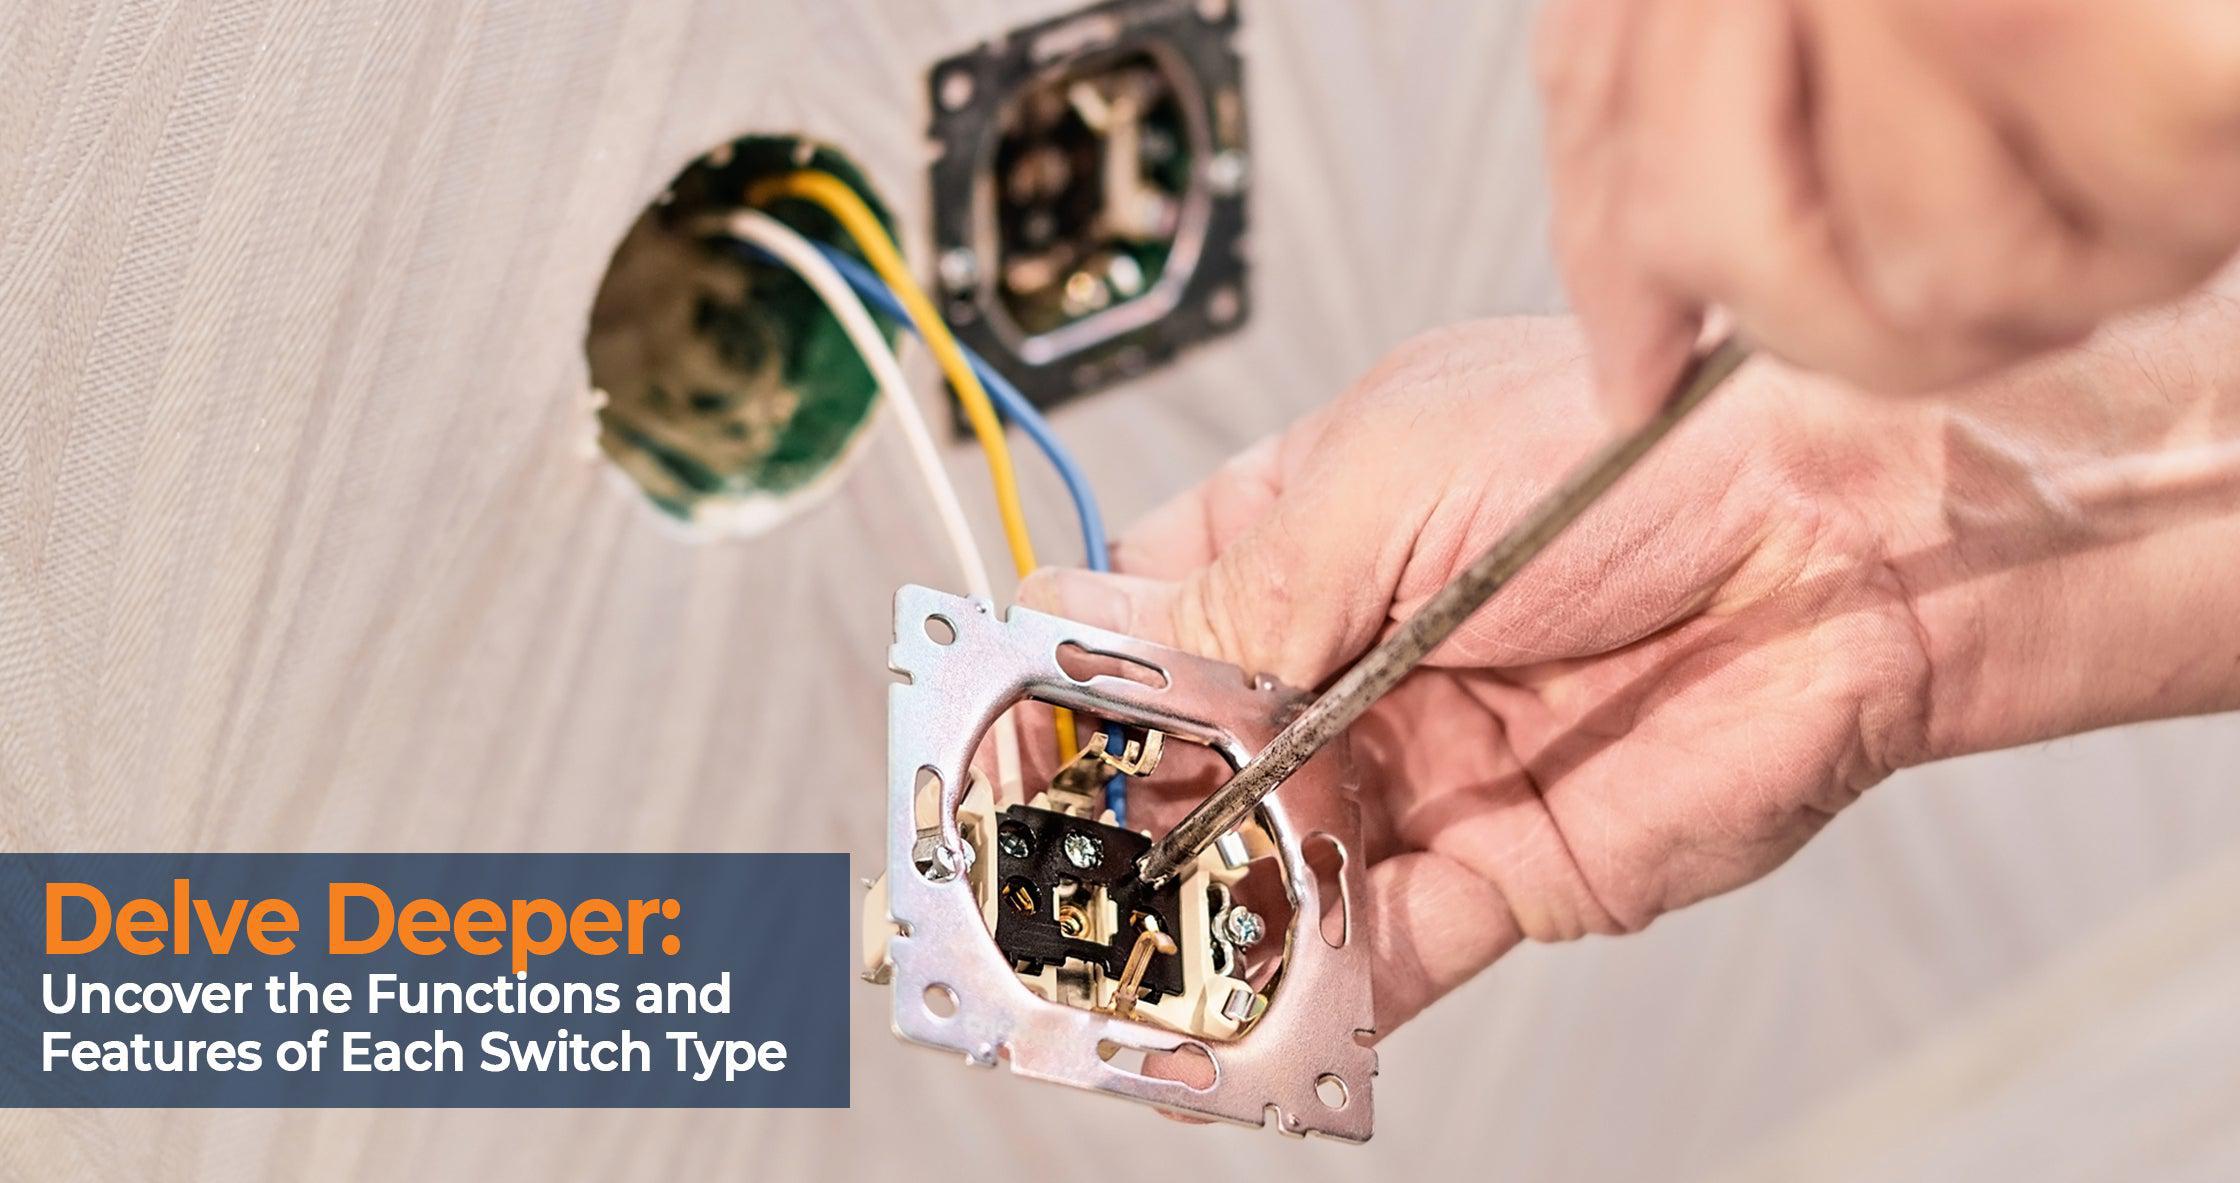 Electrician wiring a wall switch with text overlay "Delve Deeper: Uncover the Functions and Features of Each Switch Type"